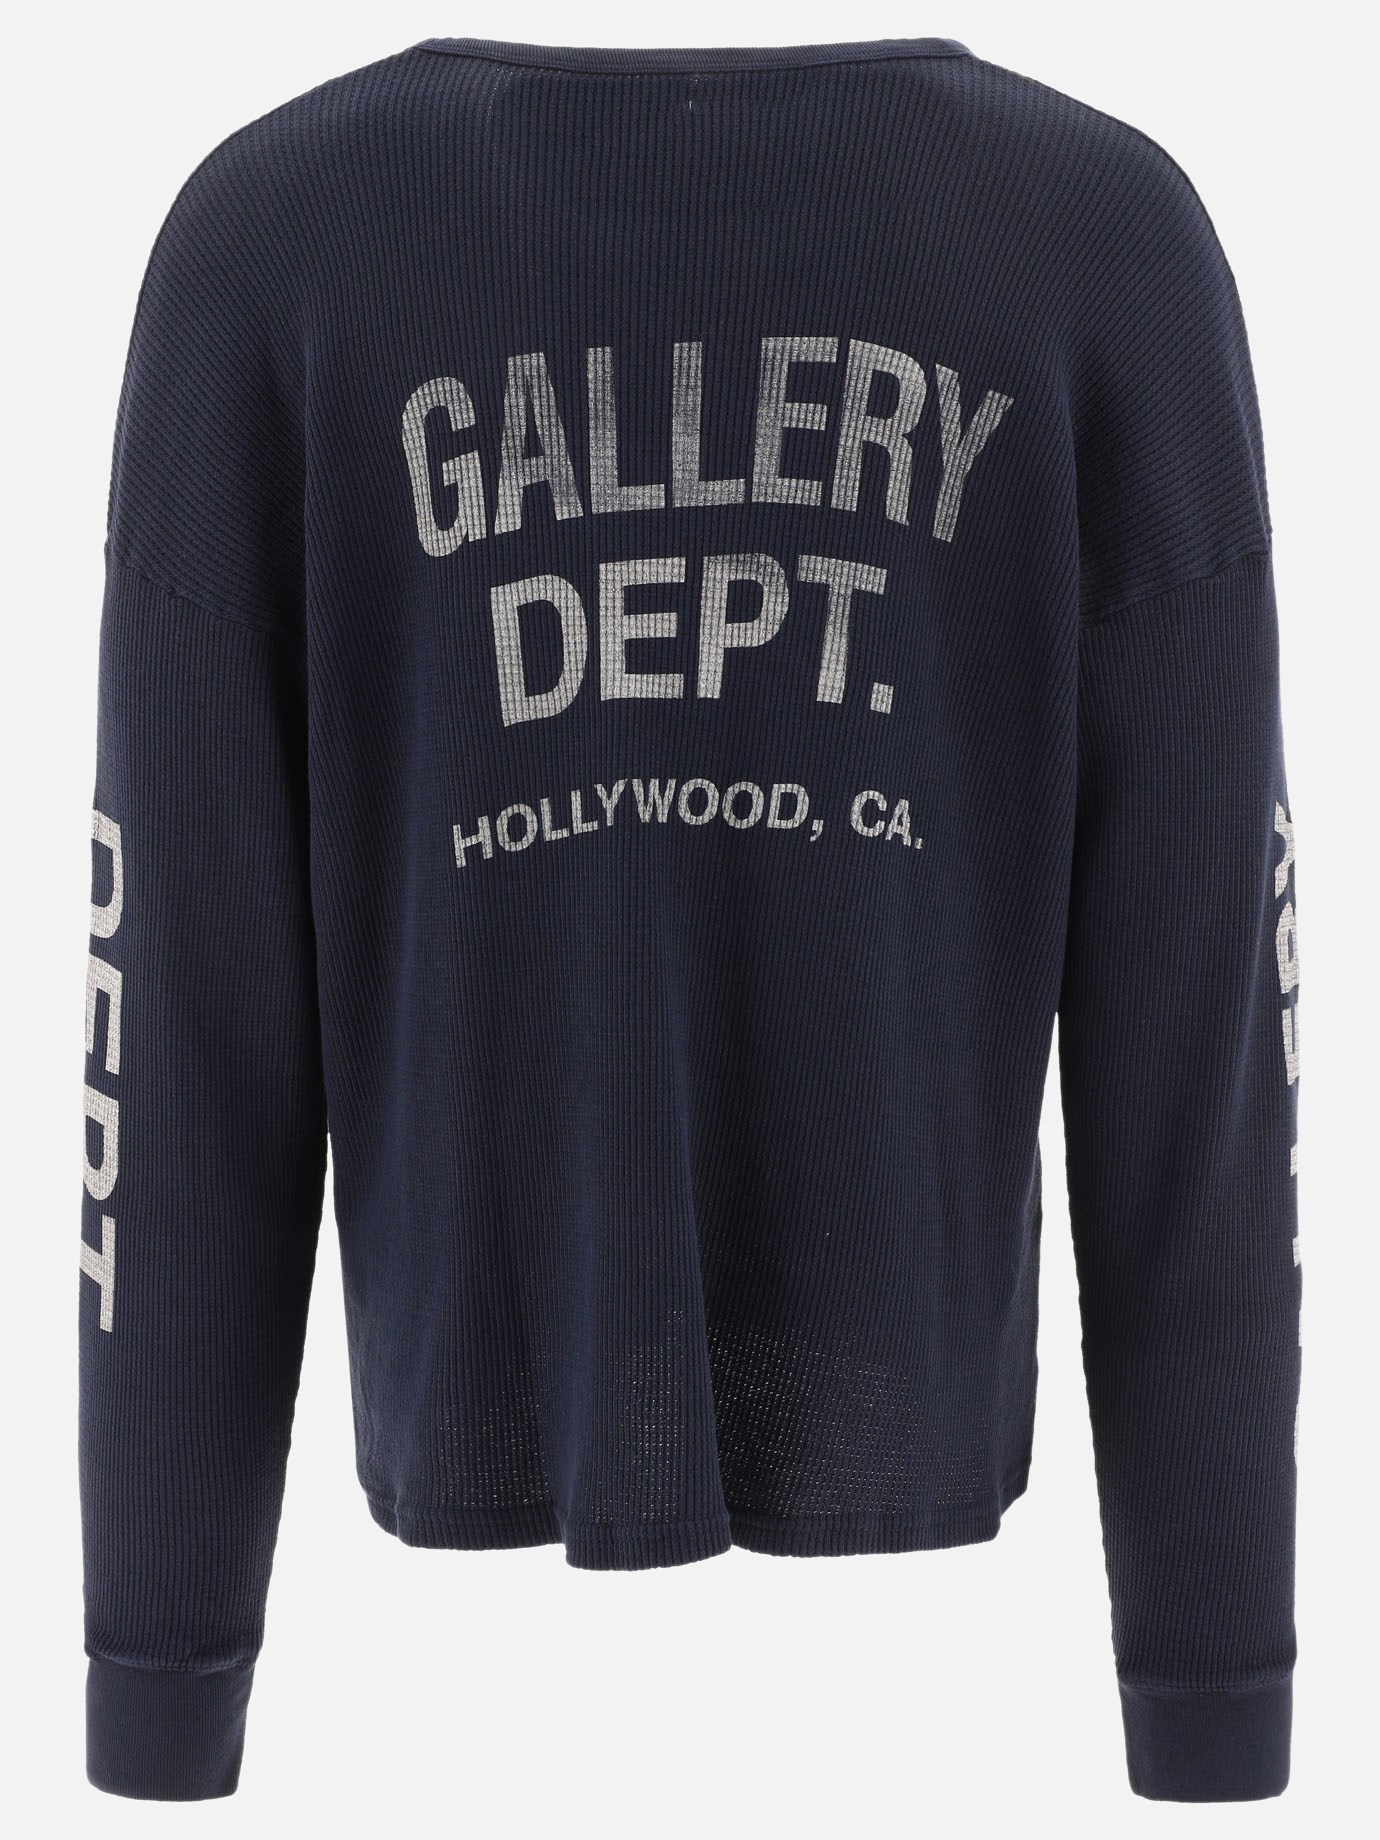 T-shirt  Thermal  by Gallery Dept.